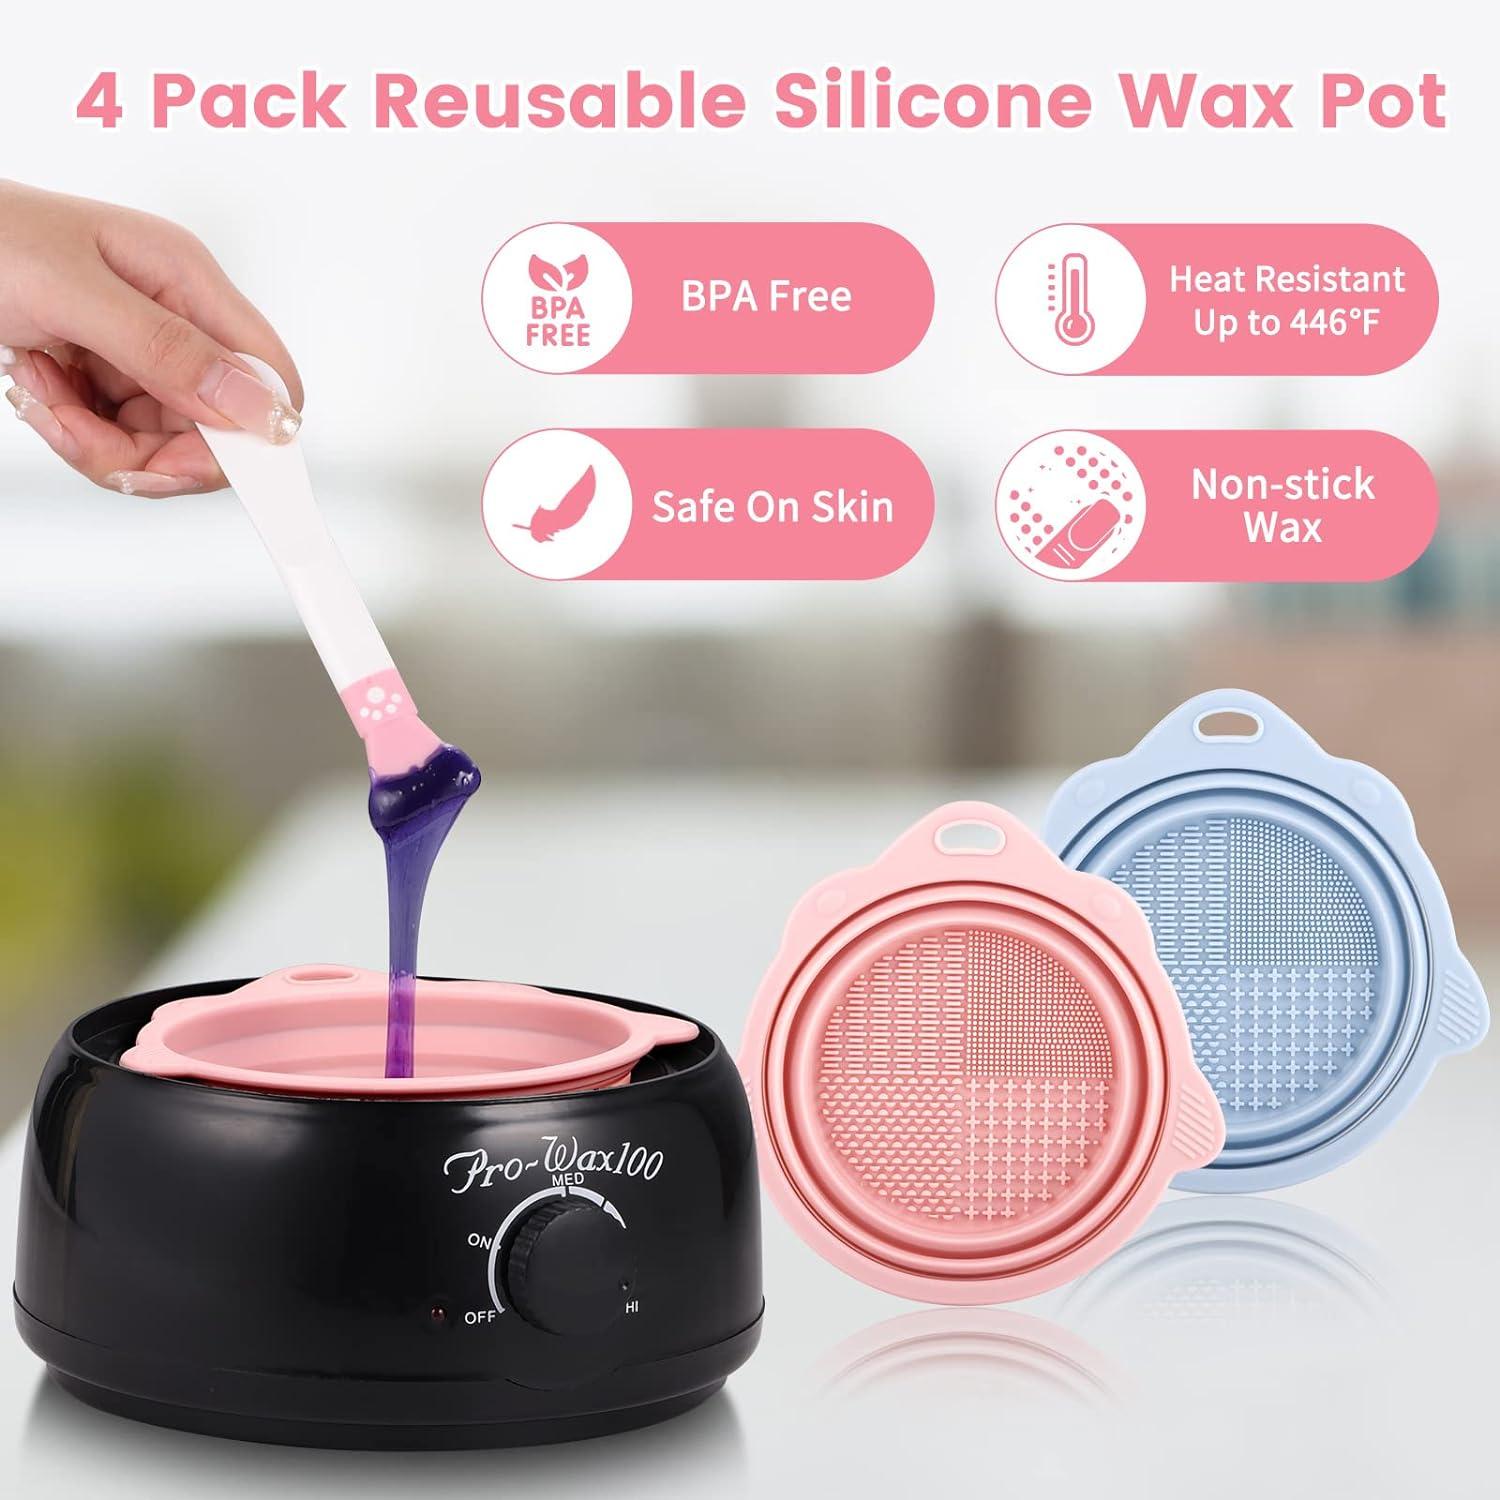  2 PCS Silicone Wax Warmer Liner Nonstick Wax Pot Replacement  Wax Warmer Liner Bowl with Wax Spatula, Heat Safe,Easy Clean,Reusable &  Foldable Waxing Liner for All Kinds of 16oz Wax